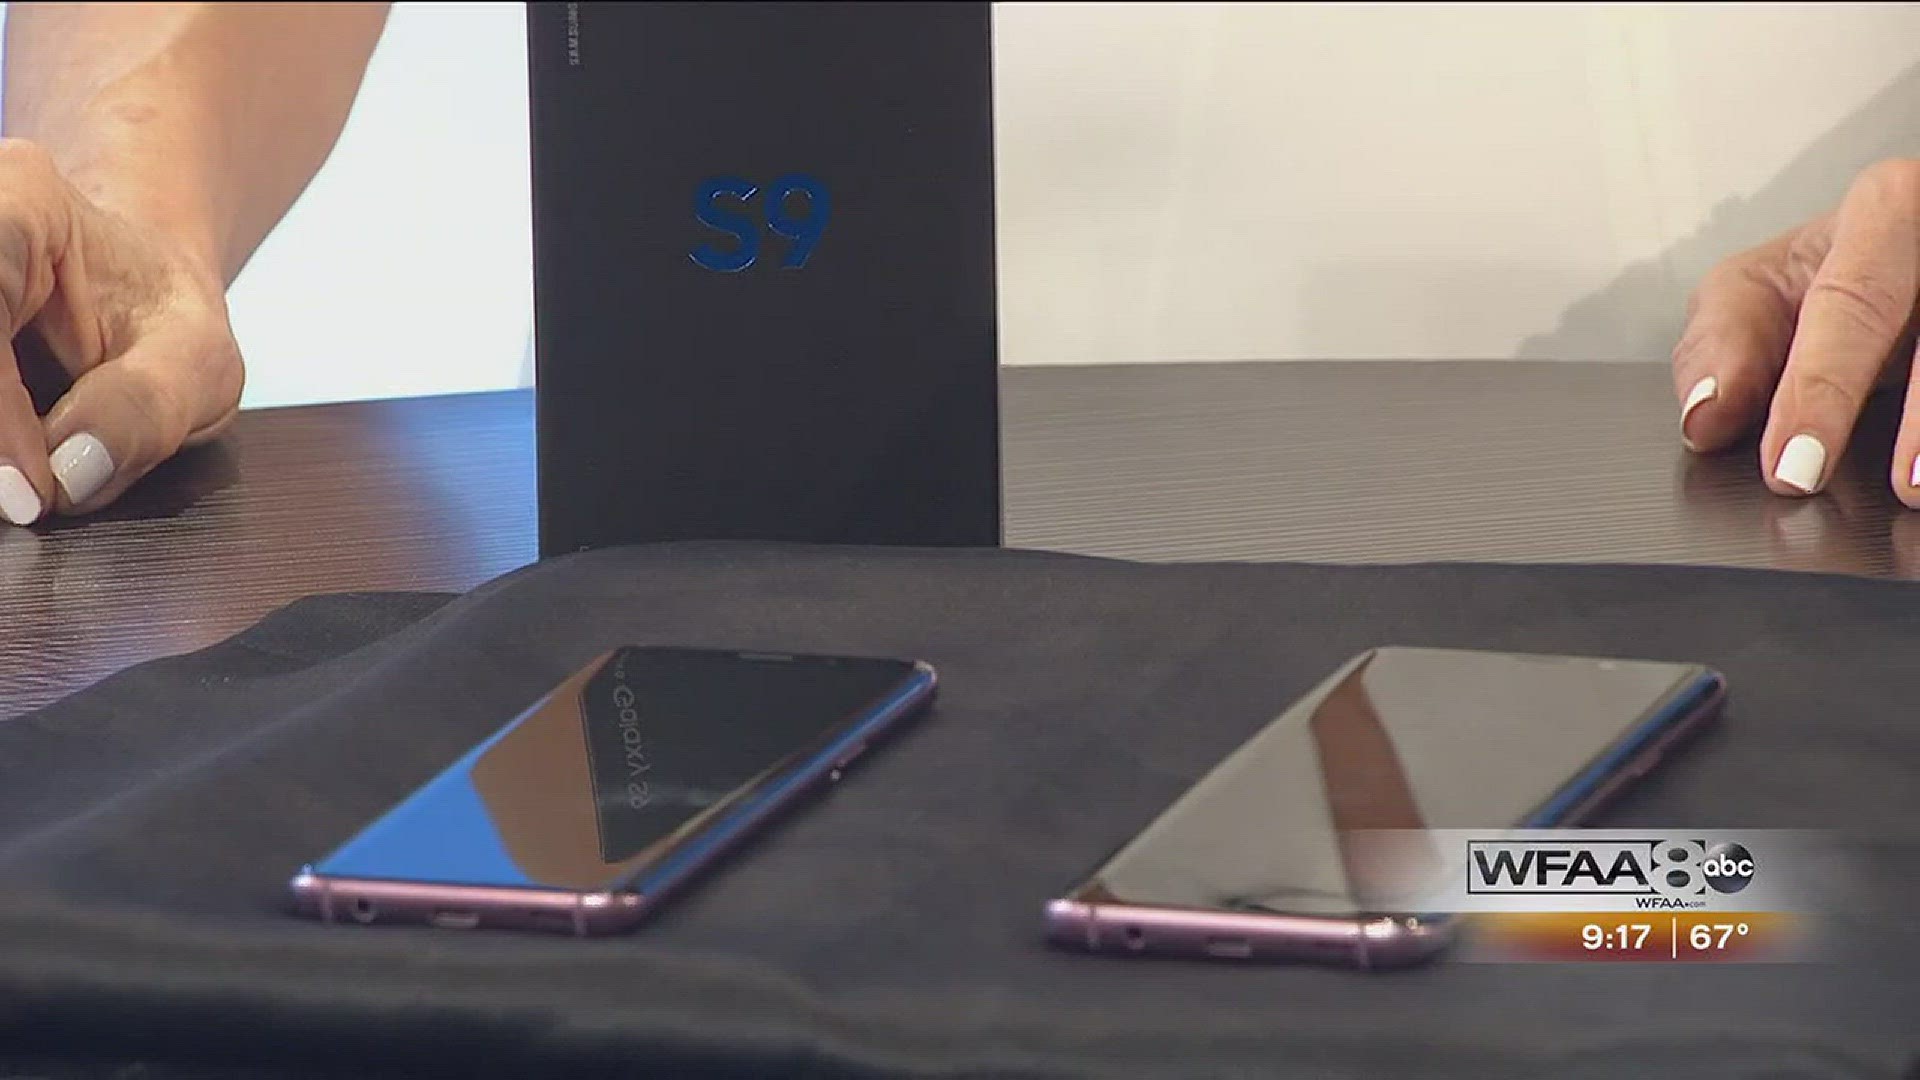 We check out the new phones from Samsung